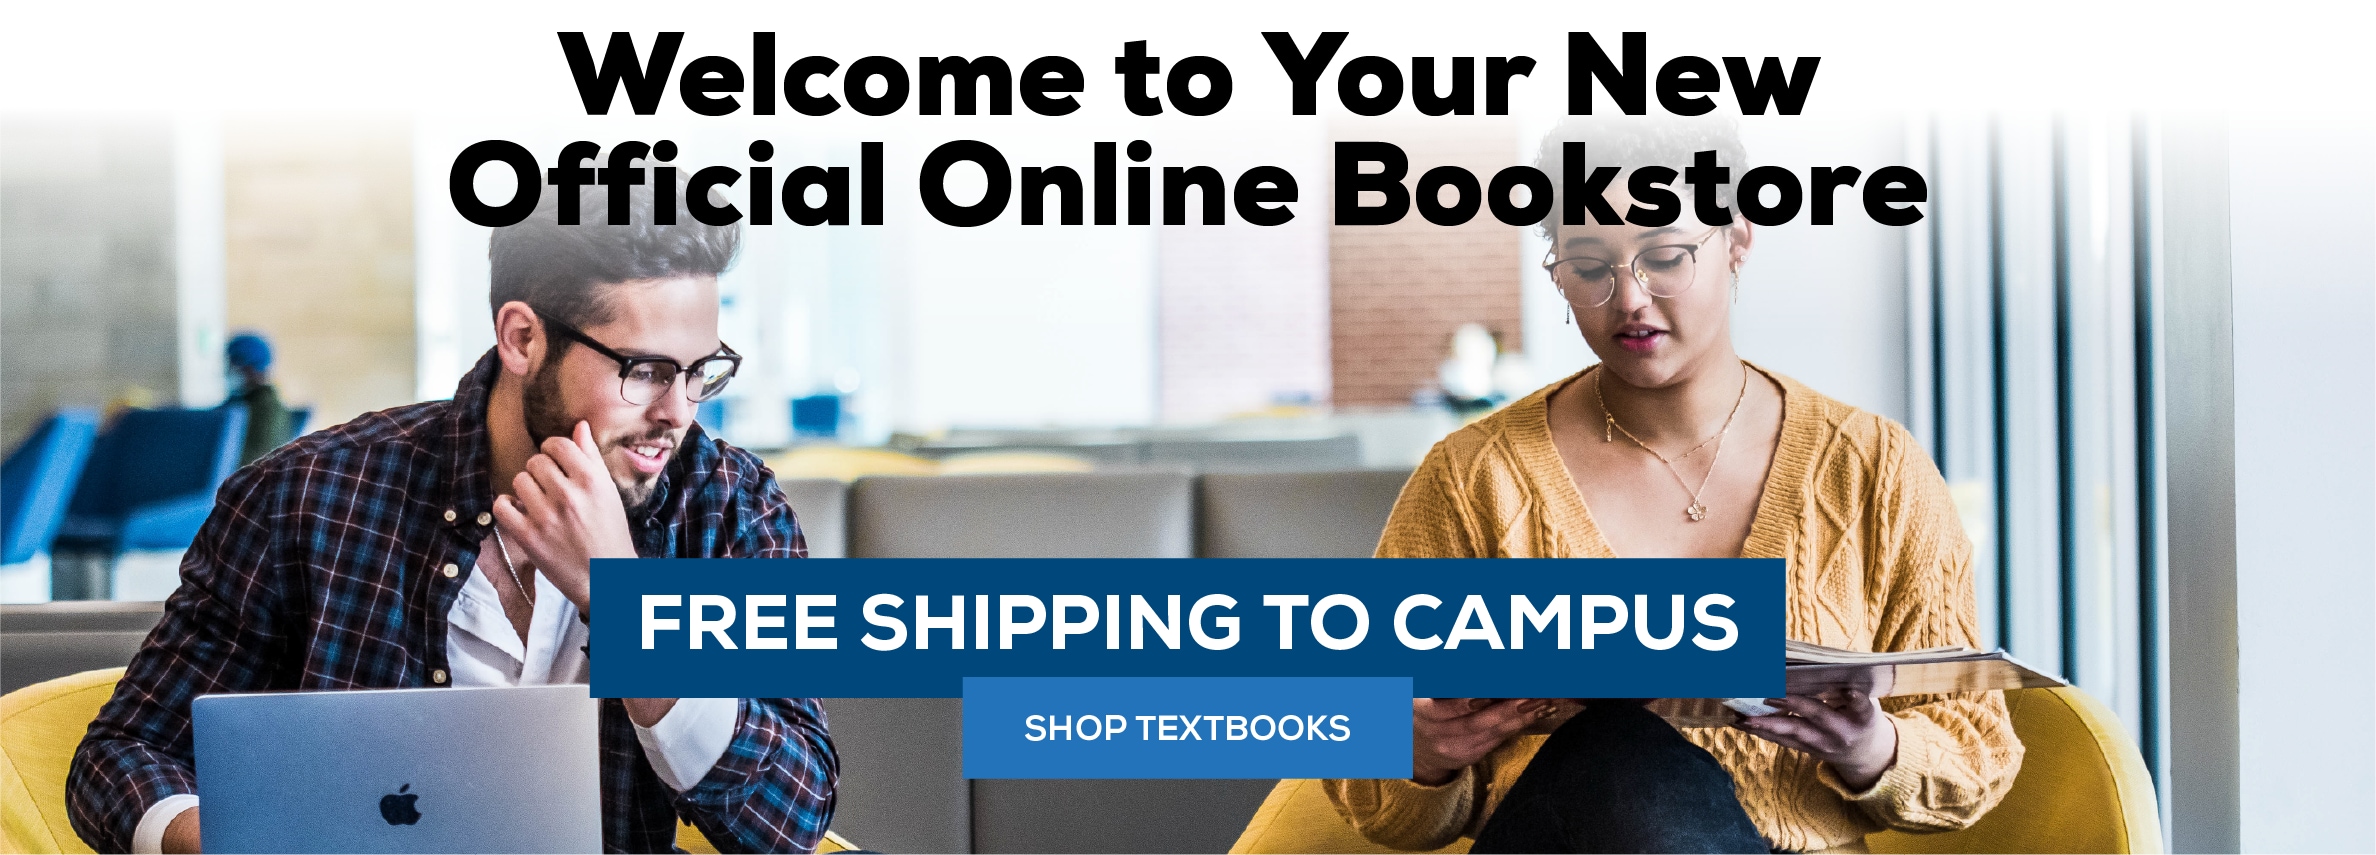 Welcome to your official online bookstore. Free shipping to campus! Shop textbooks.